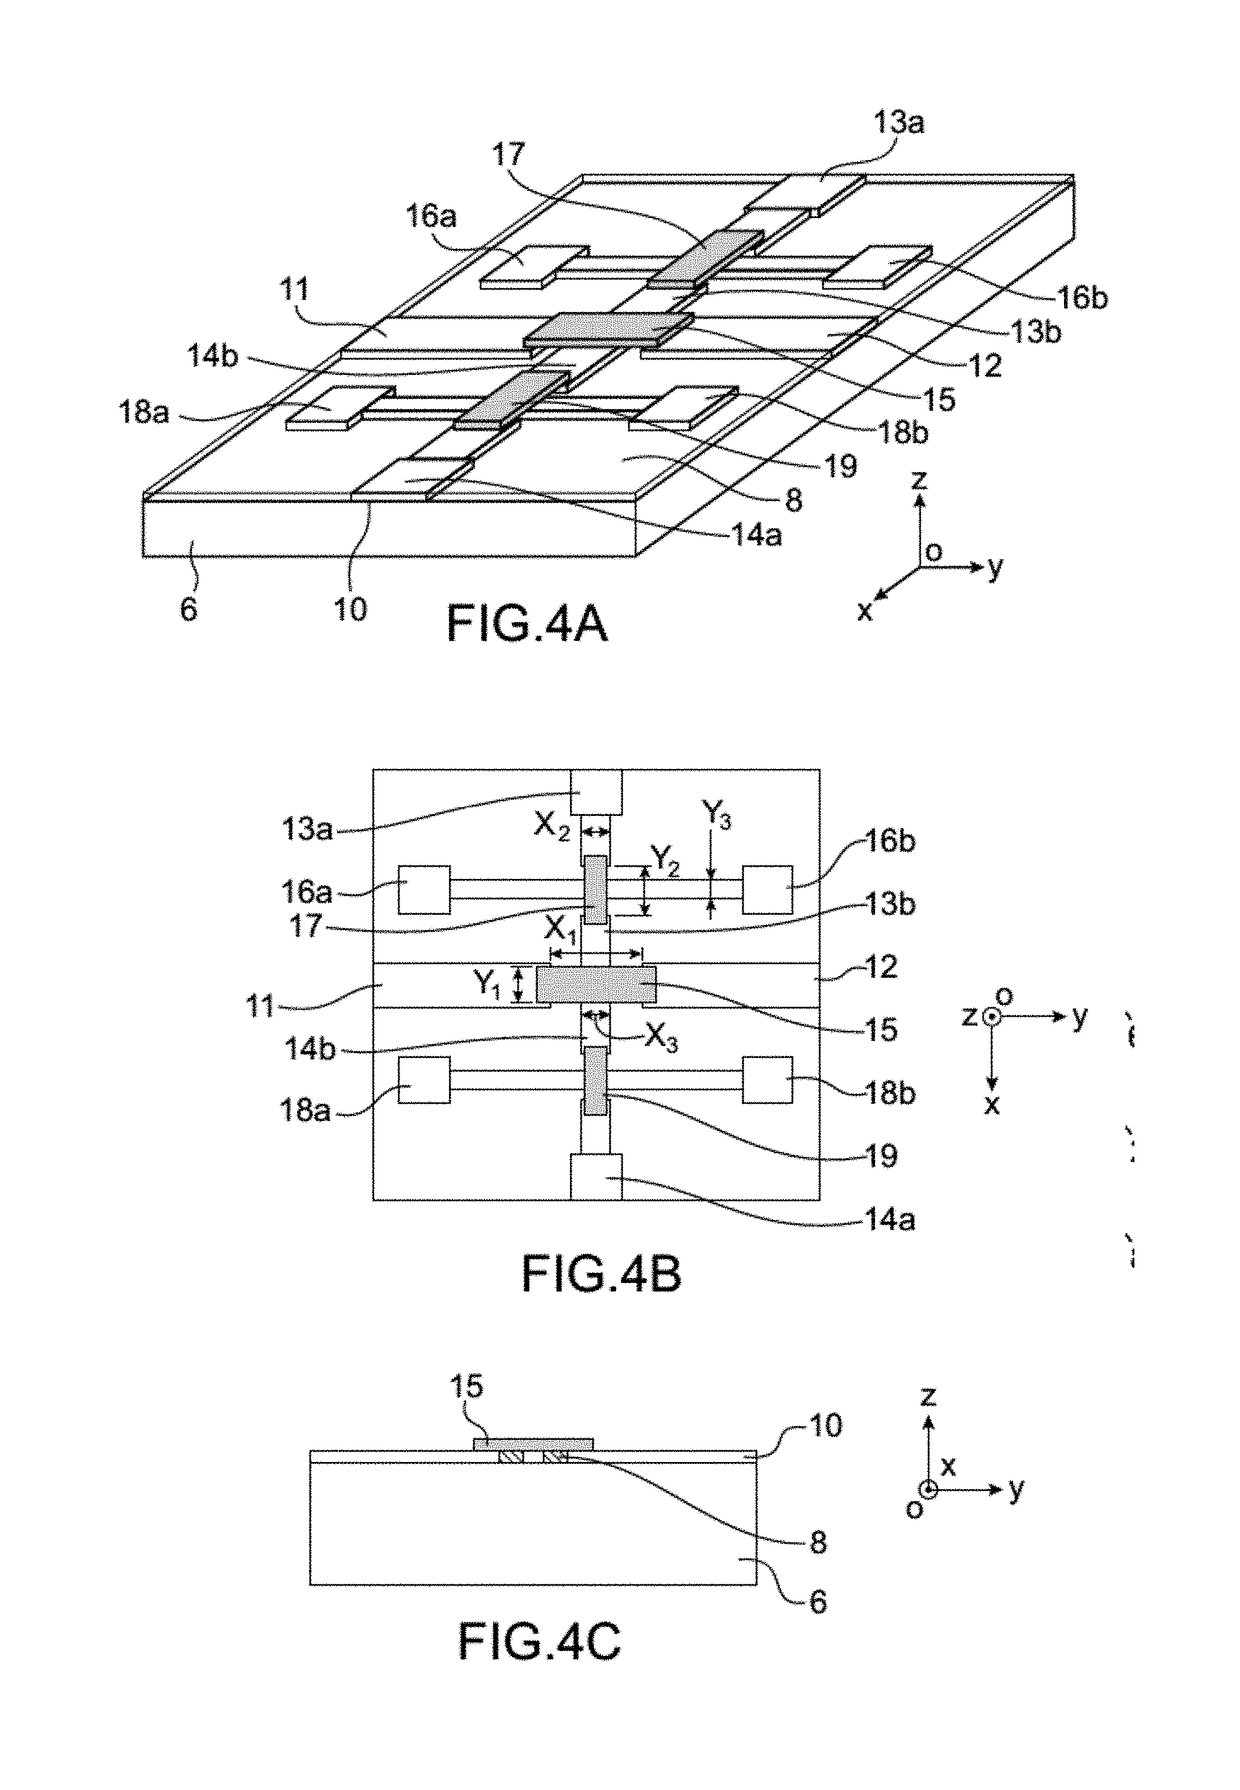 Rf/dc decoupling system for RF switches based on phase change material